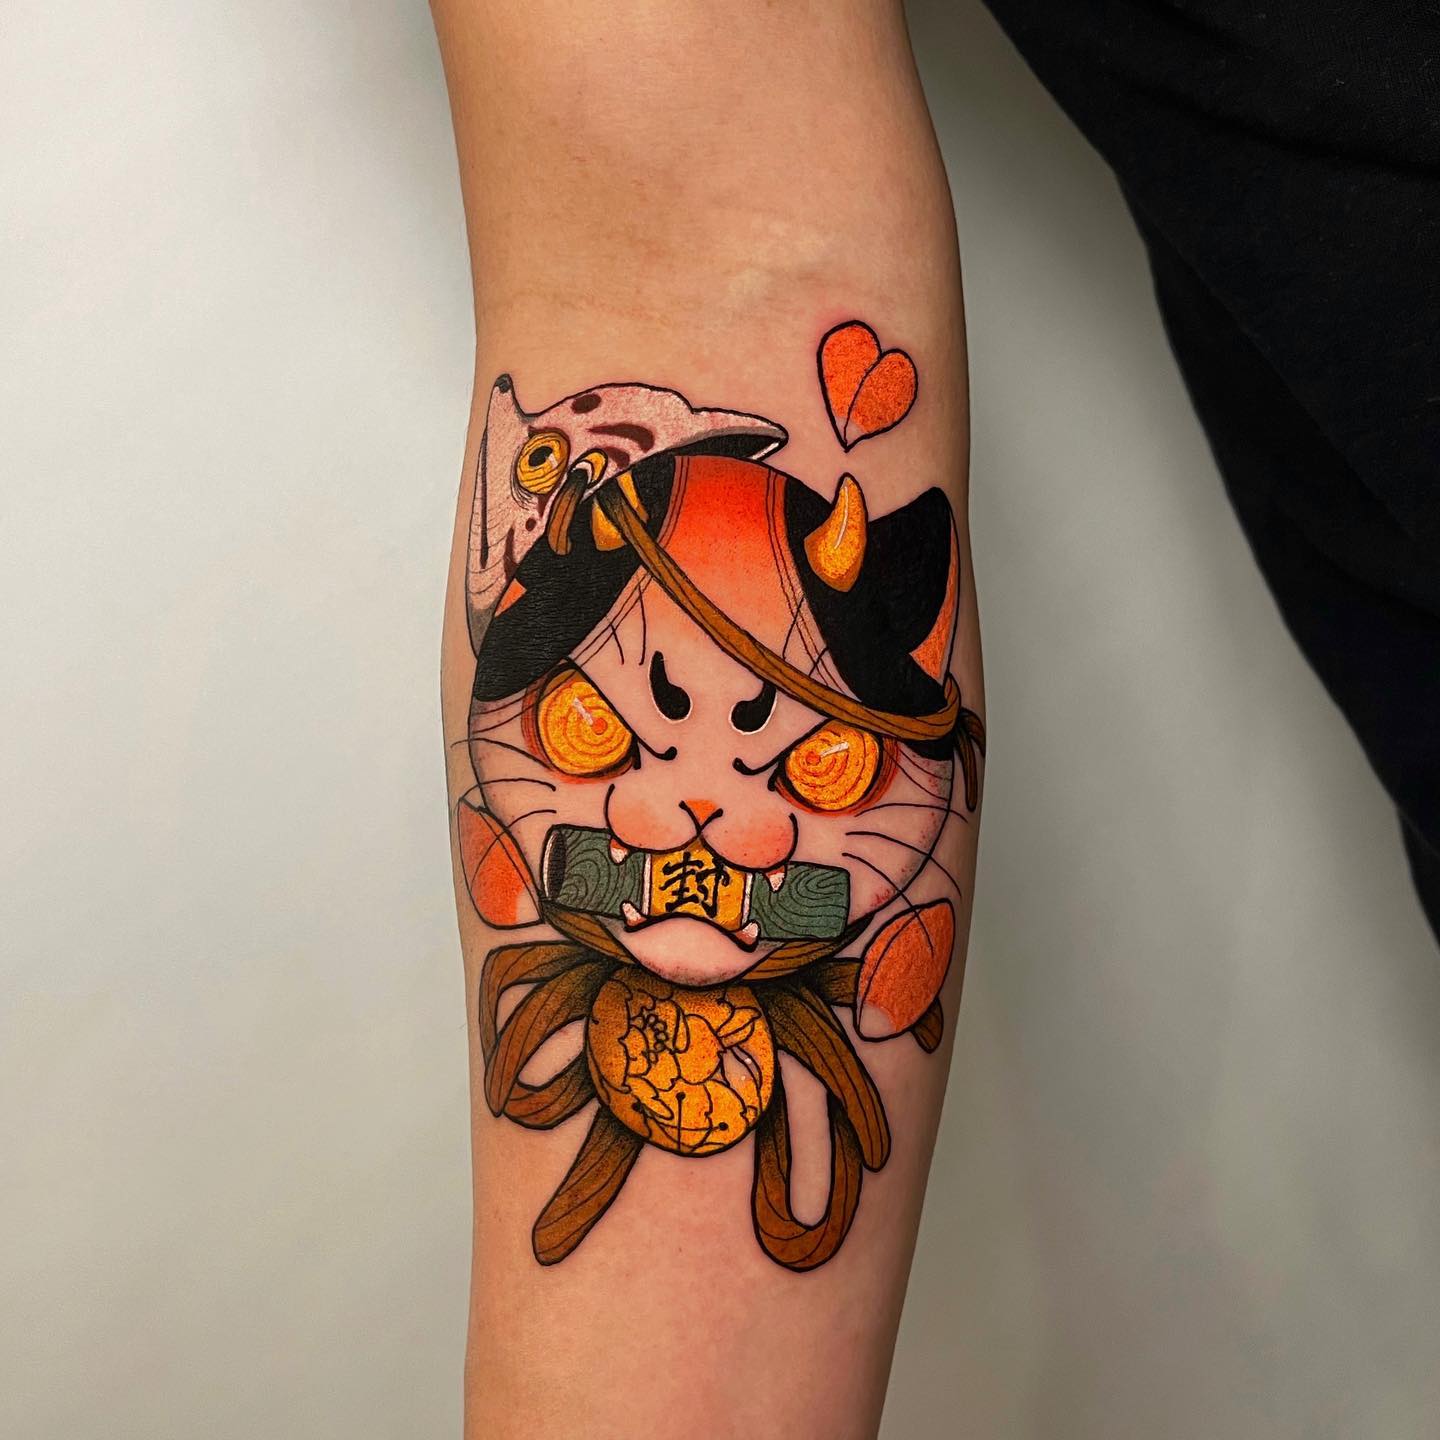 Colorful Japanese Mask Tattoo on Arm